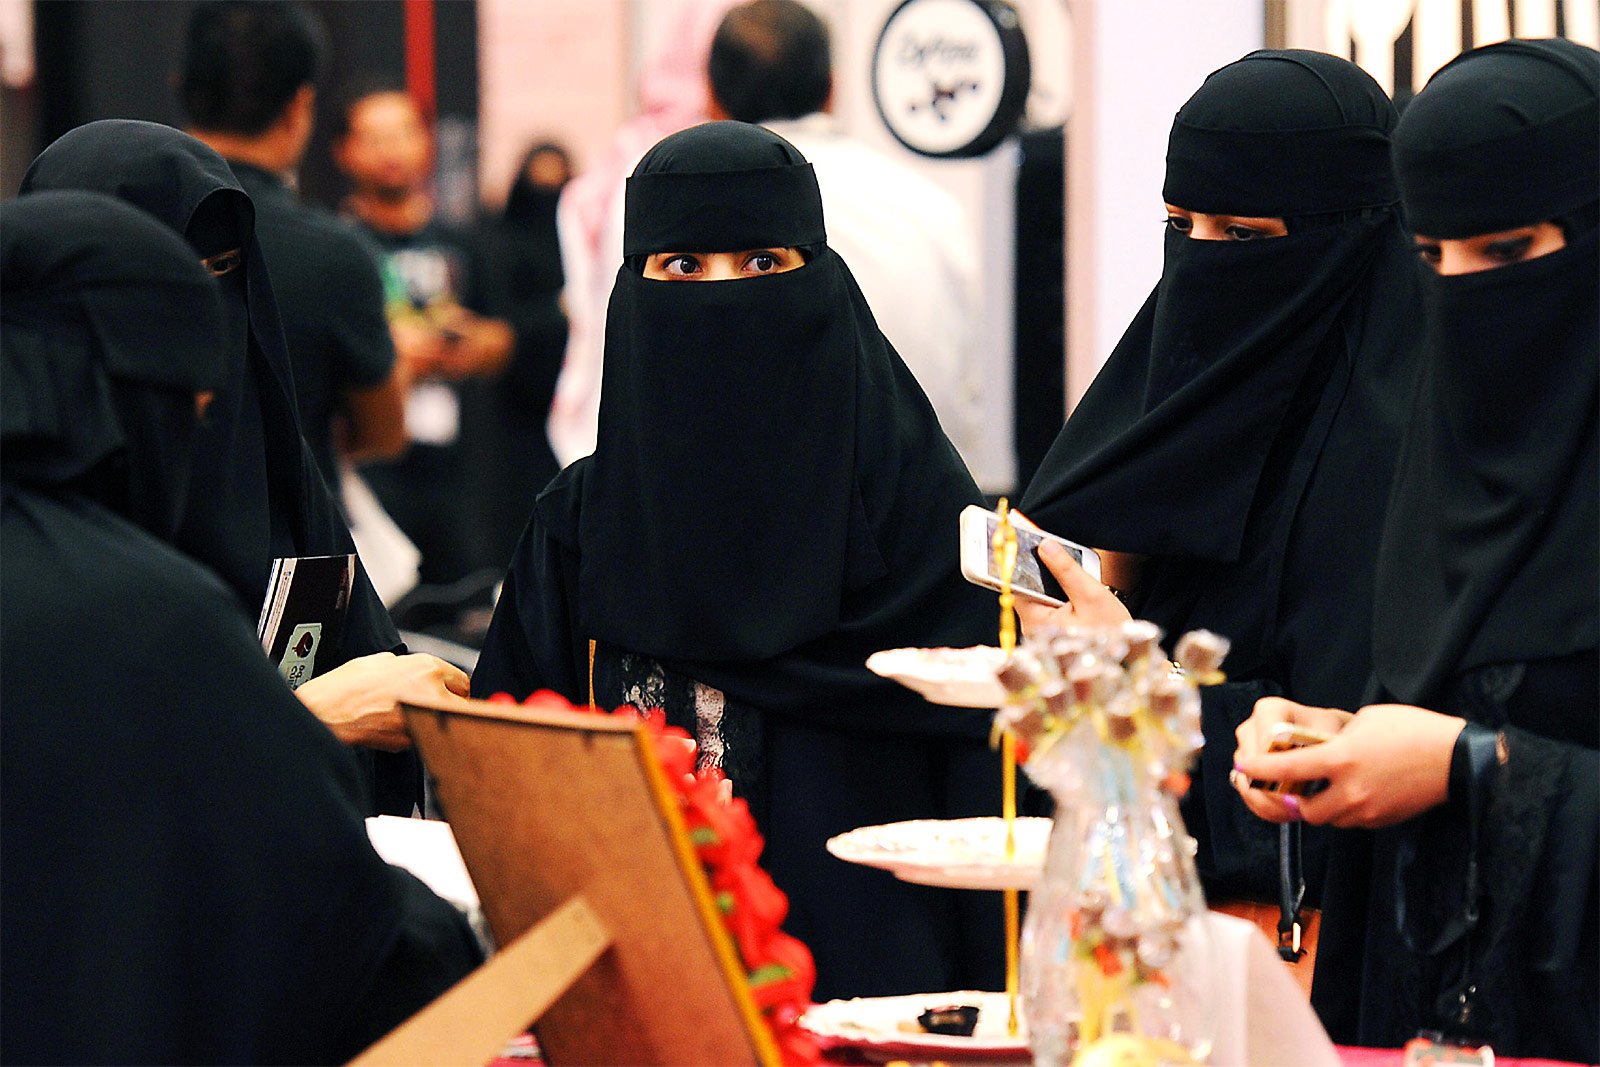 How to try on niqab in Dubai